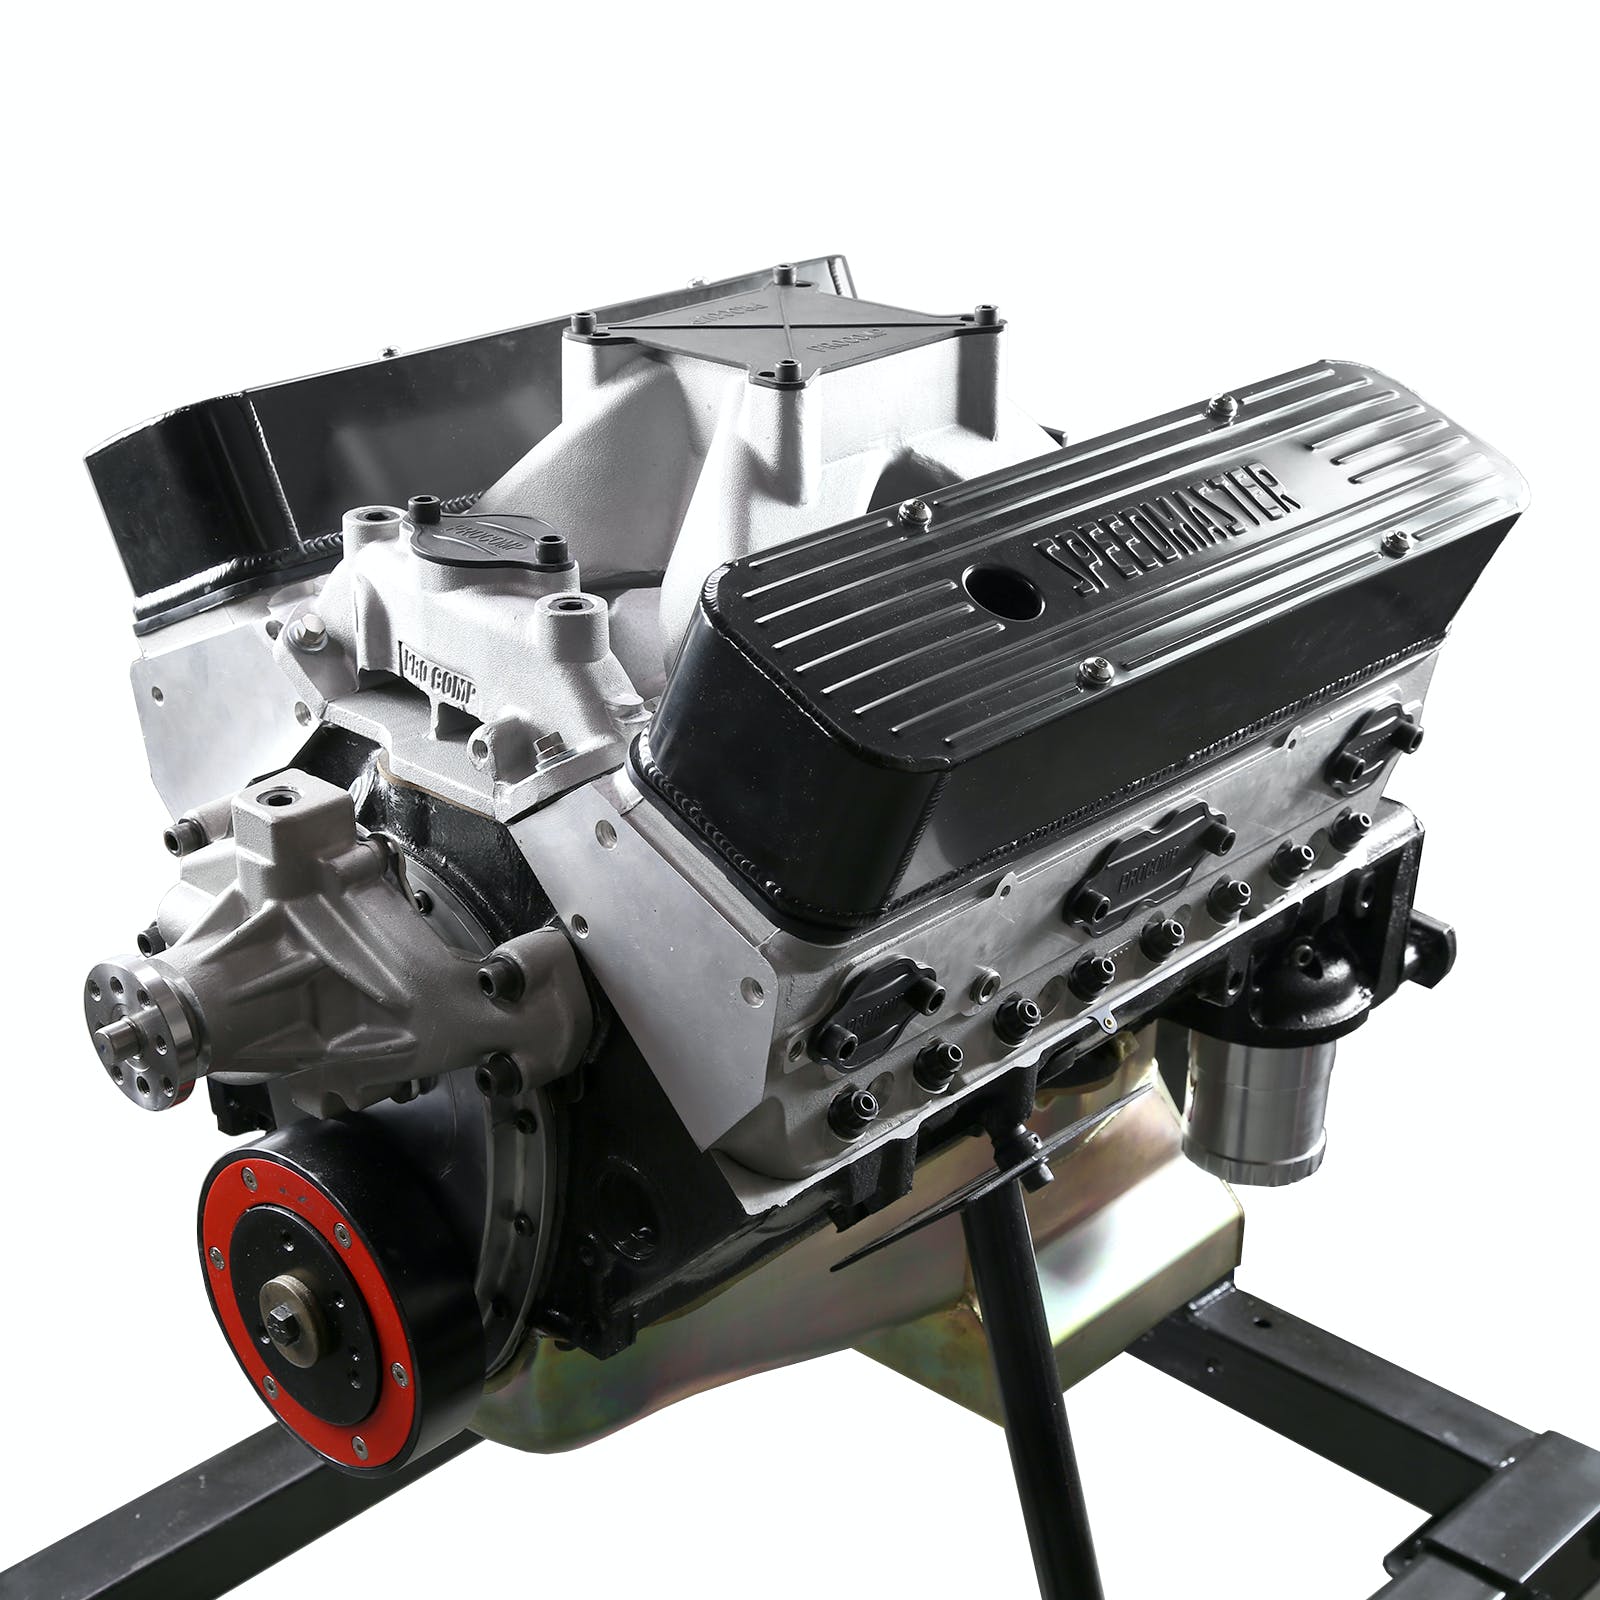 Speedmaster PCE284.1005 500Hp Forged Arsenal Cnc Aluminum Head Hyd. Roller Crate Engine